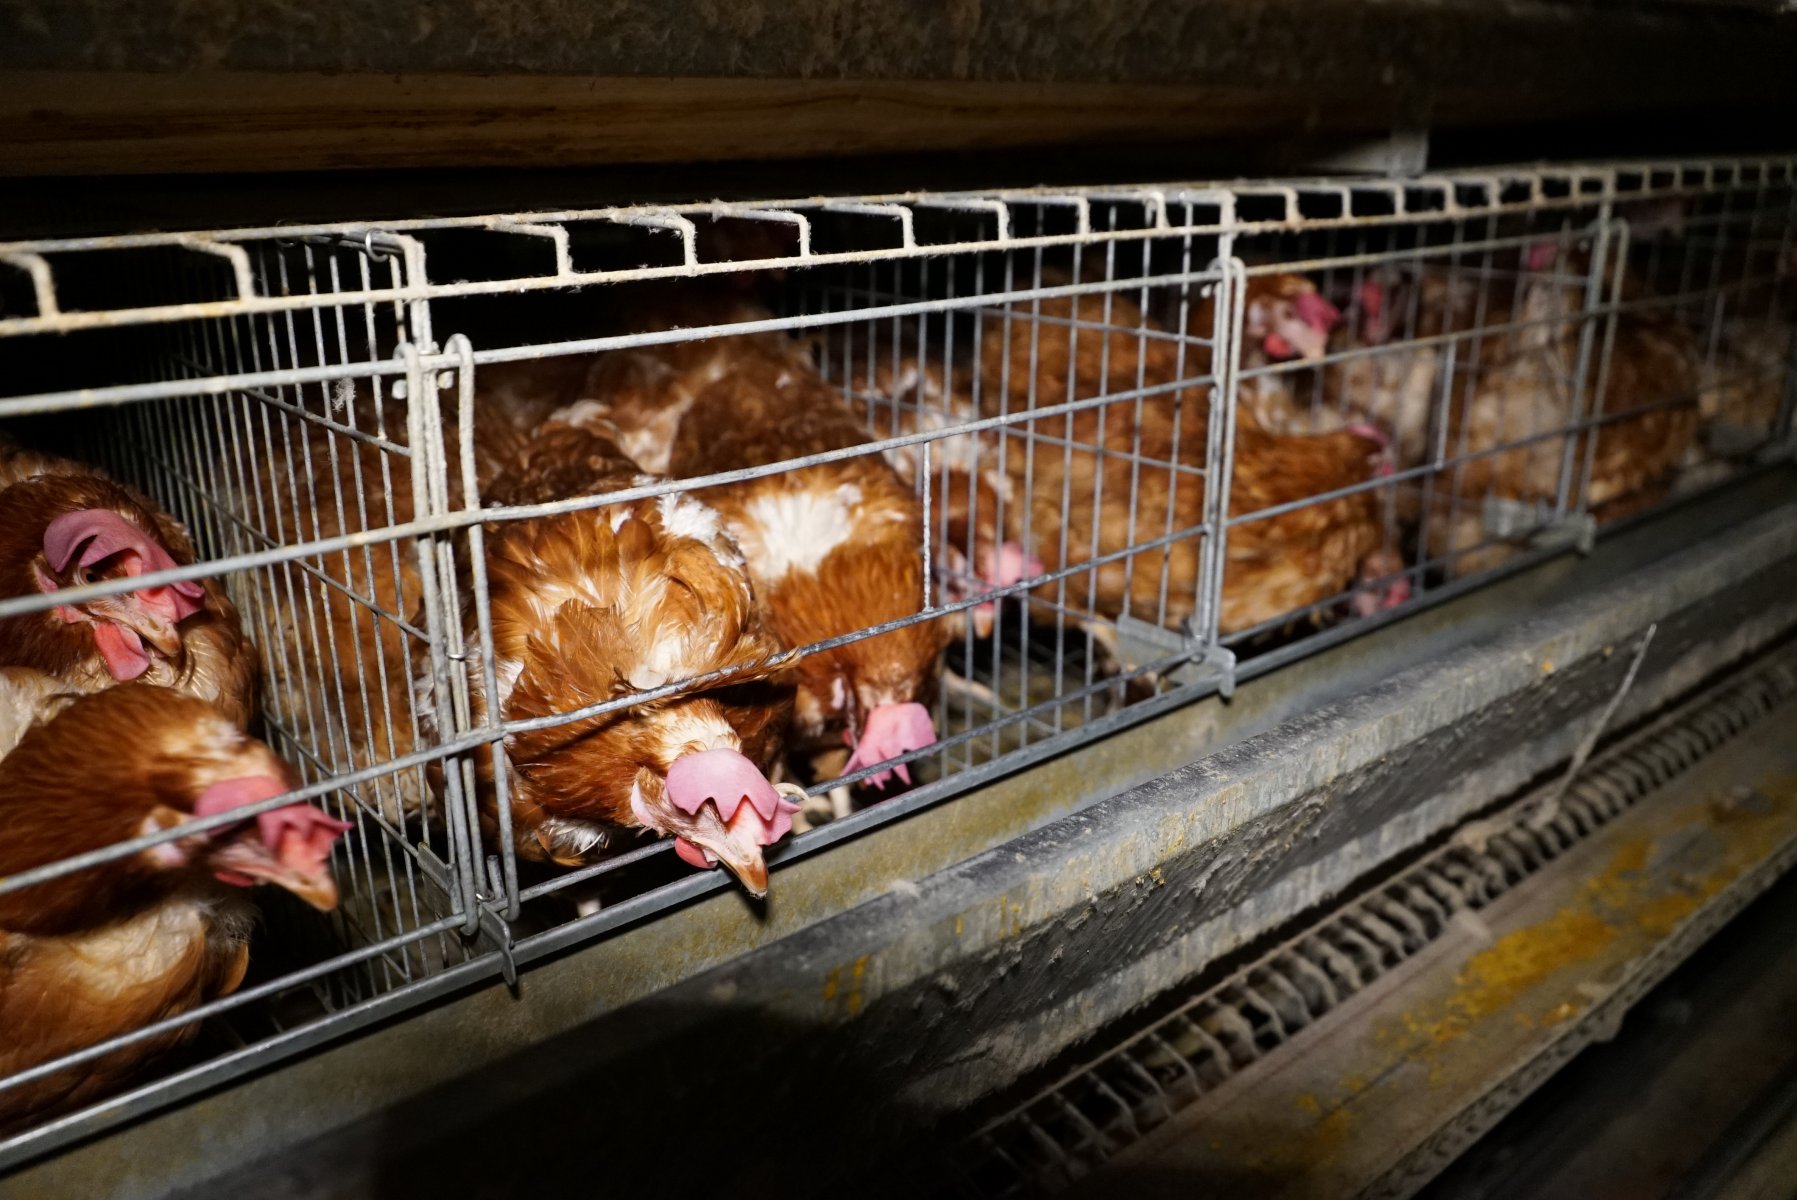 Image shows hens in battery cages